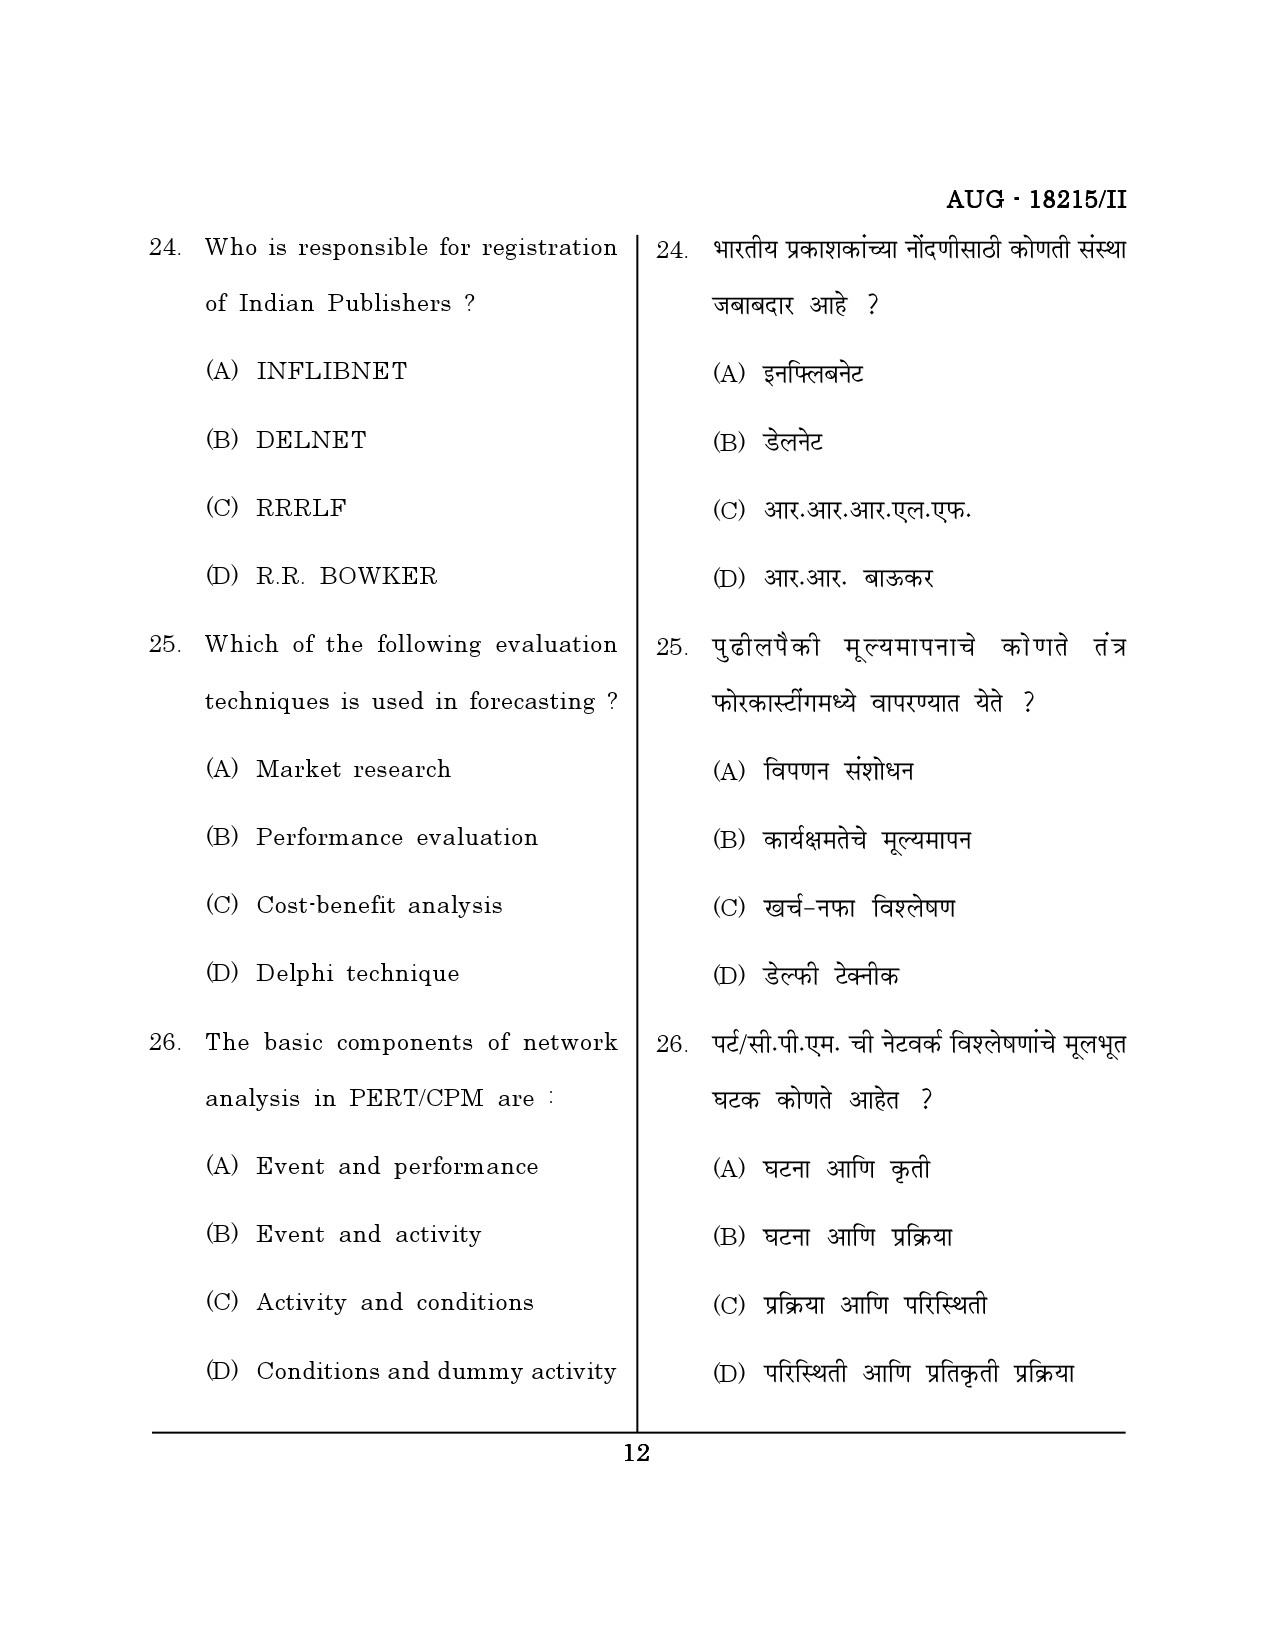 Maharashtra SET Library Information Science Question Paper II August 2015 11